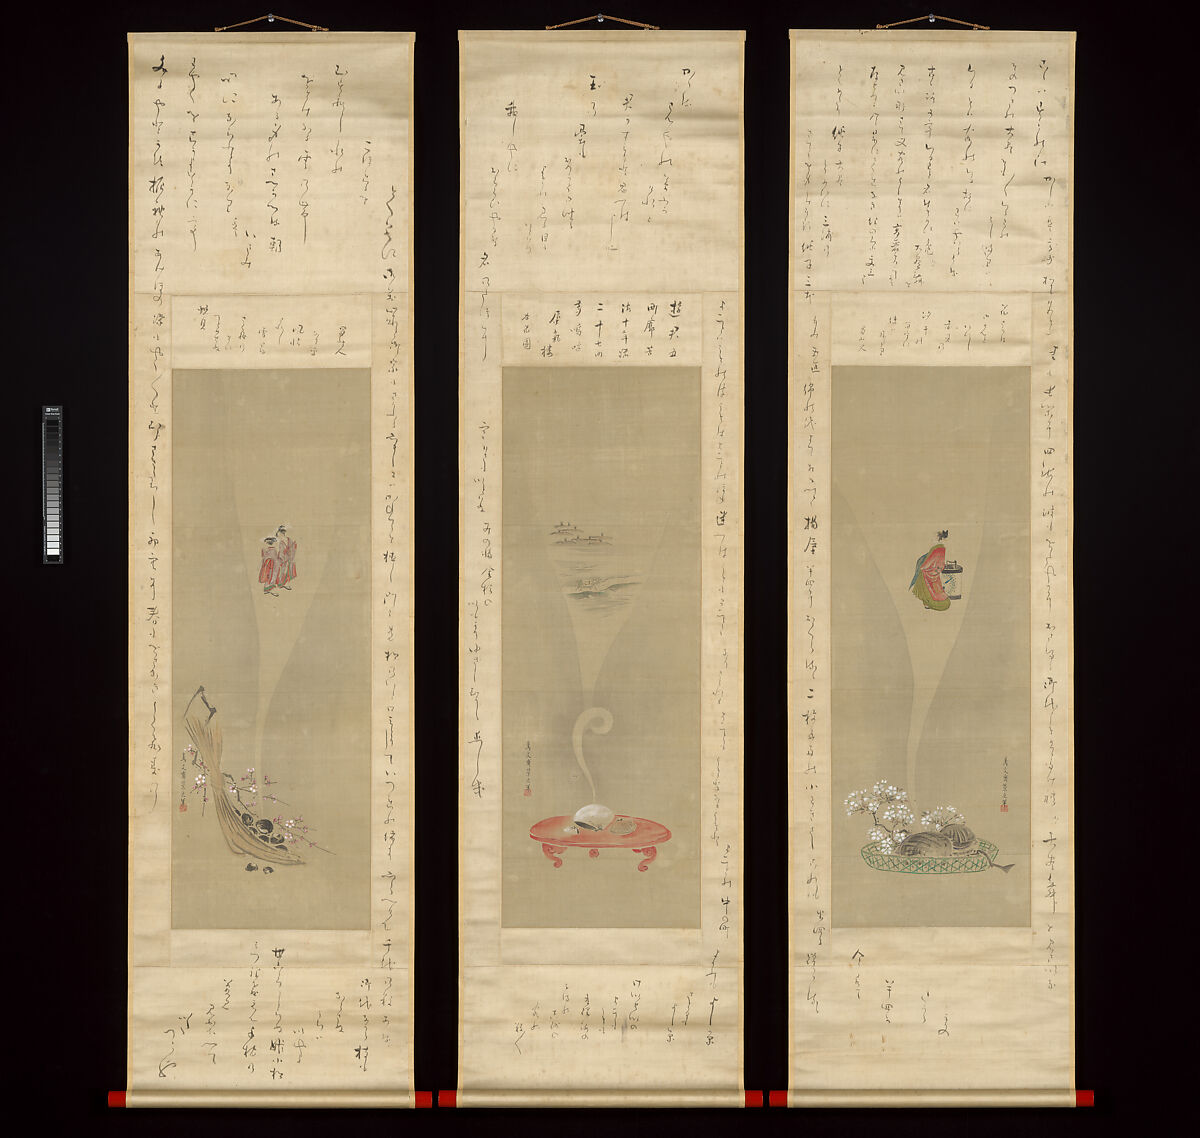 Shellfish and Apparitions of the Yoshiwara Pleasure Quarter, Chōbunsai Eishi  Japanese, Triptych of hanging scrolls with inscribed mountings; painting: ink and color on silk; calligraphy: ink on silk mounting fabric, Japan